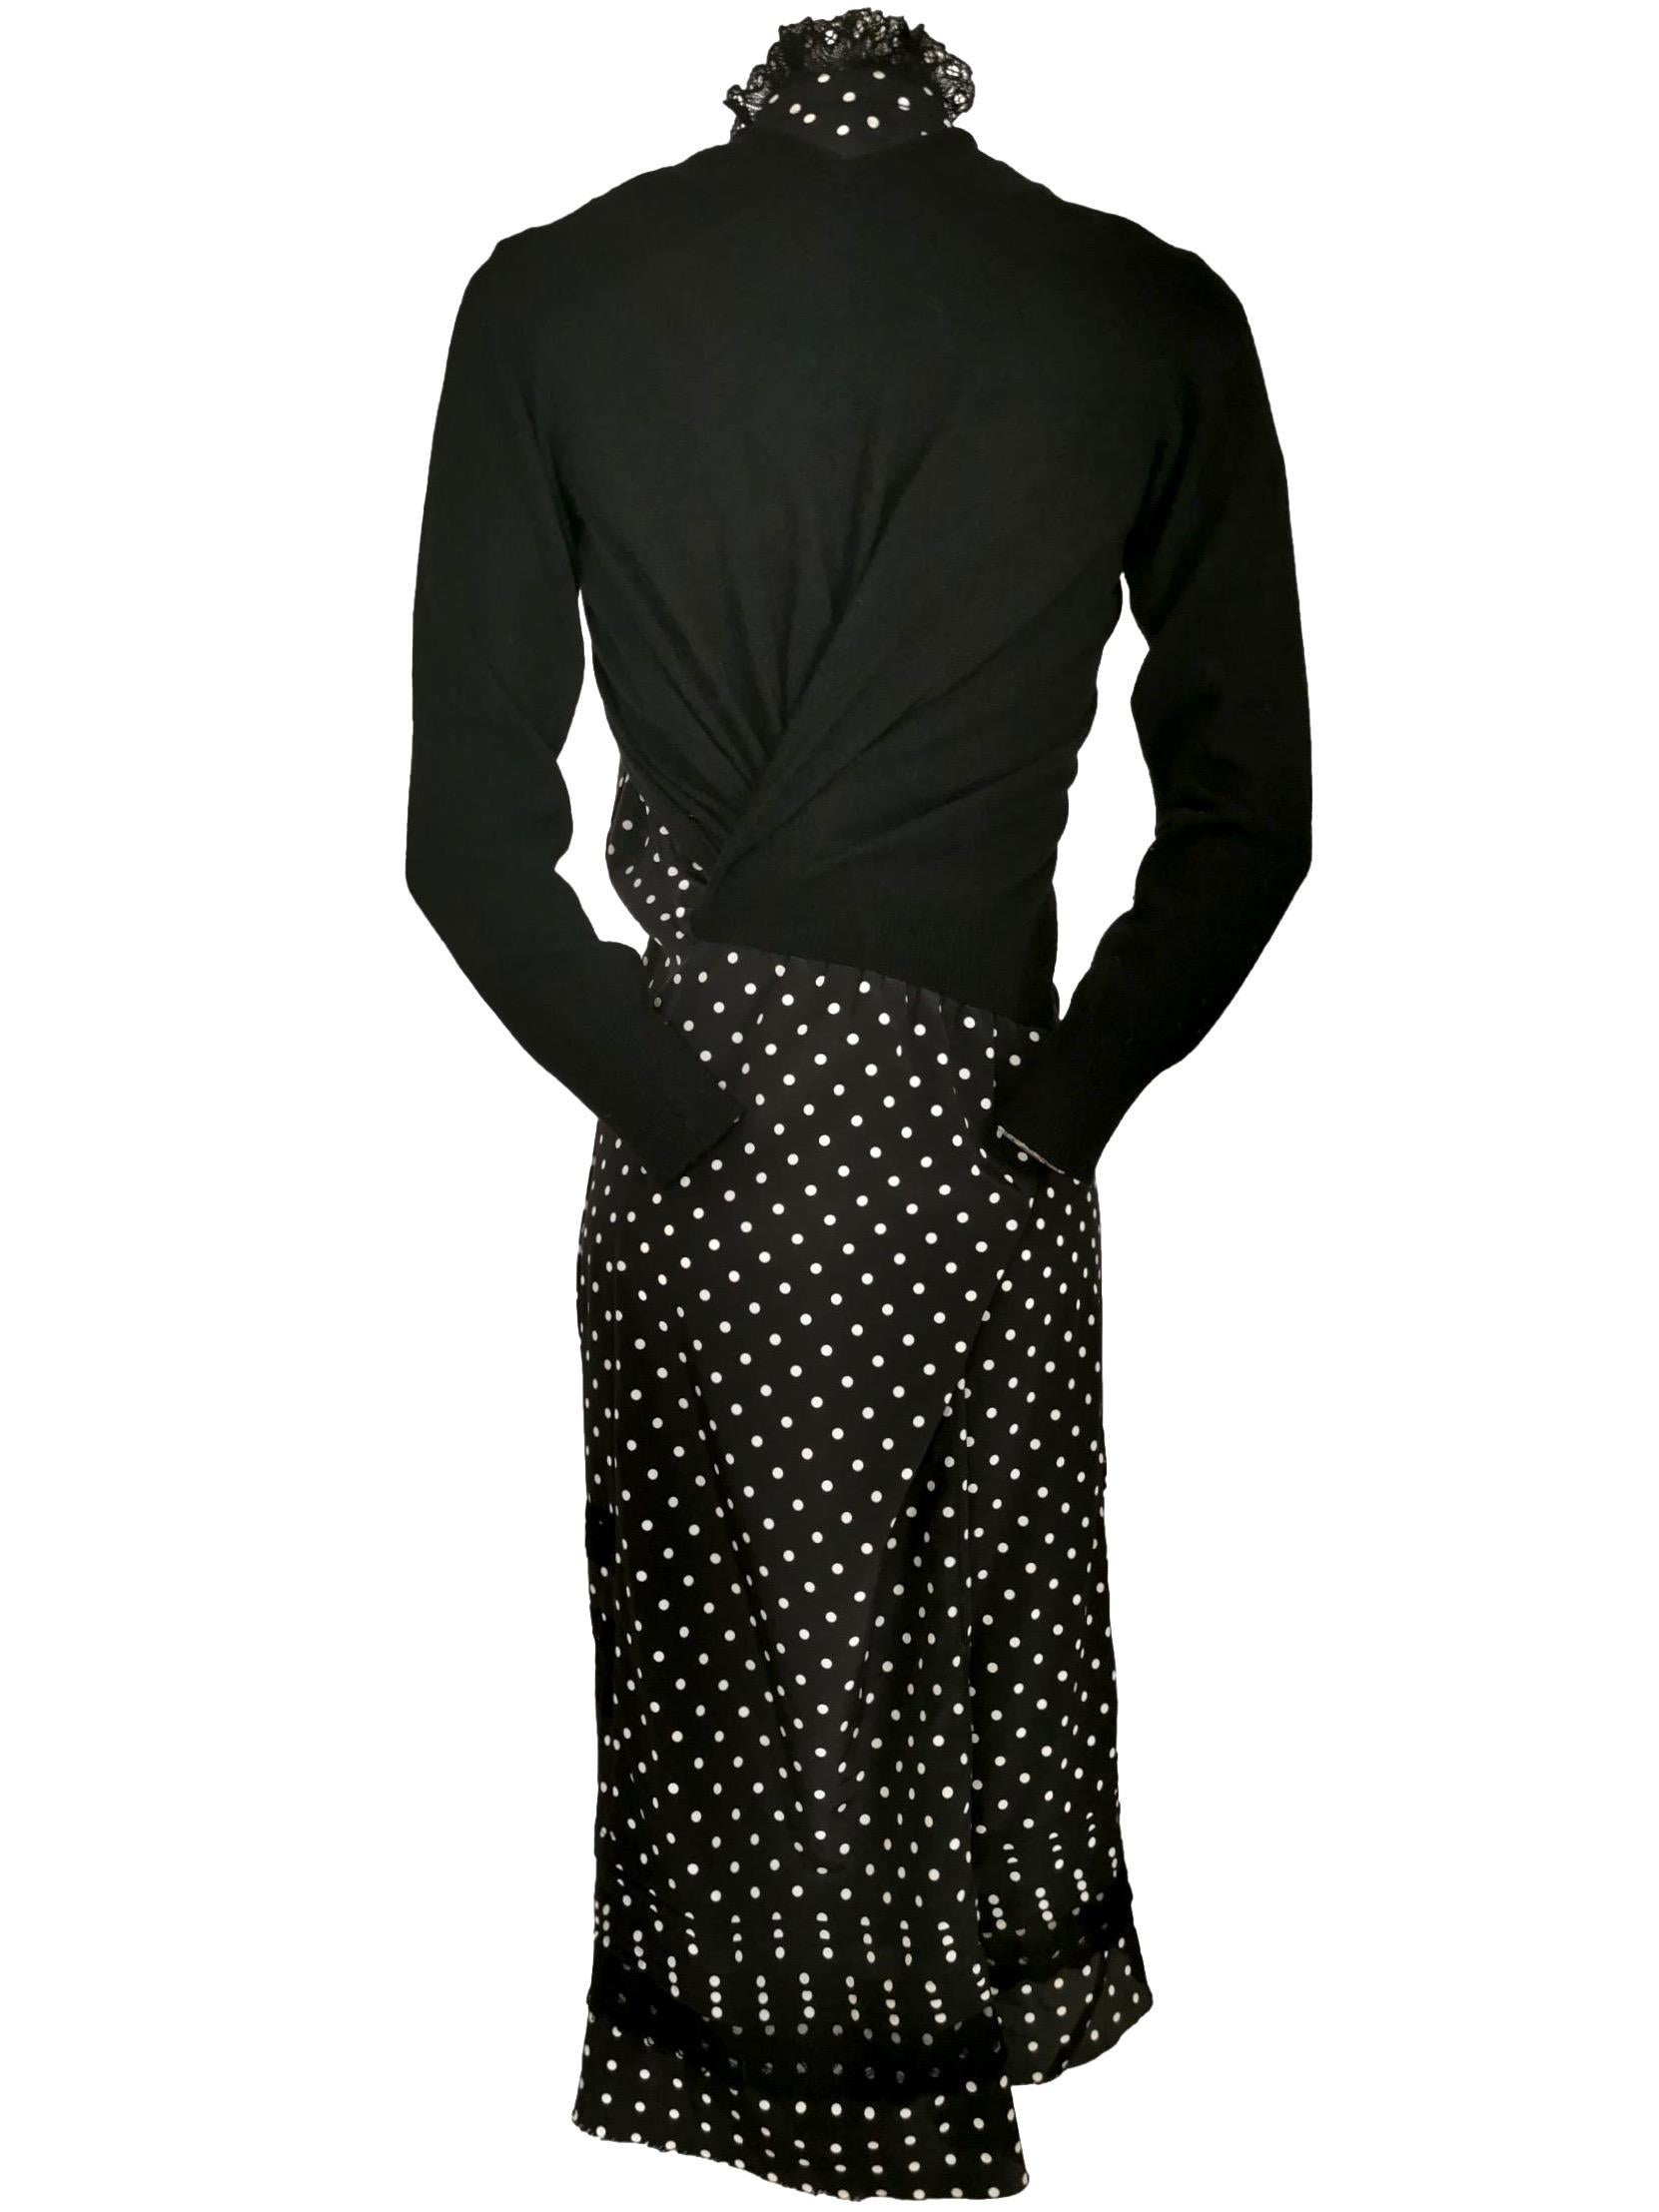 Junya Watanabe Comme des Garcons Twisted Polka Dot Cardigan Dress AD 2007 For Sale 1